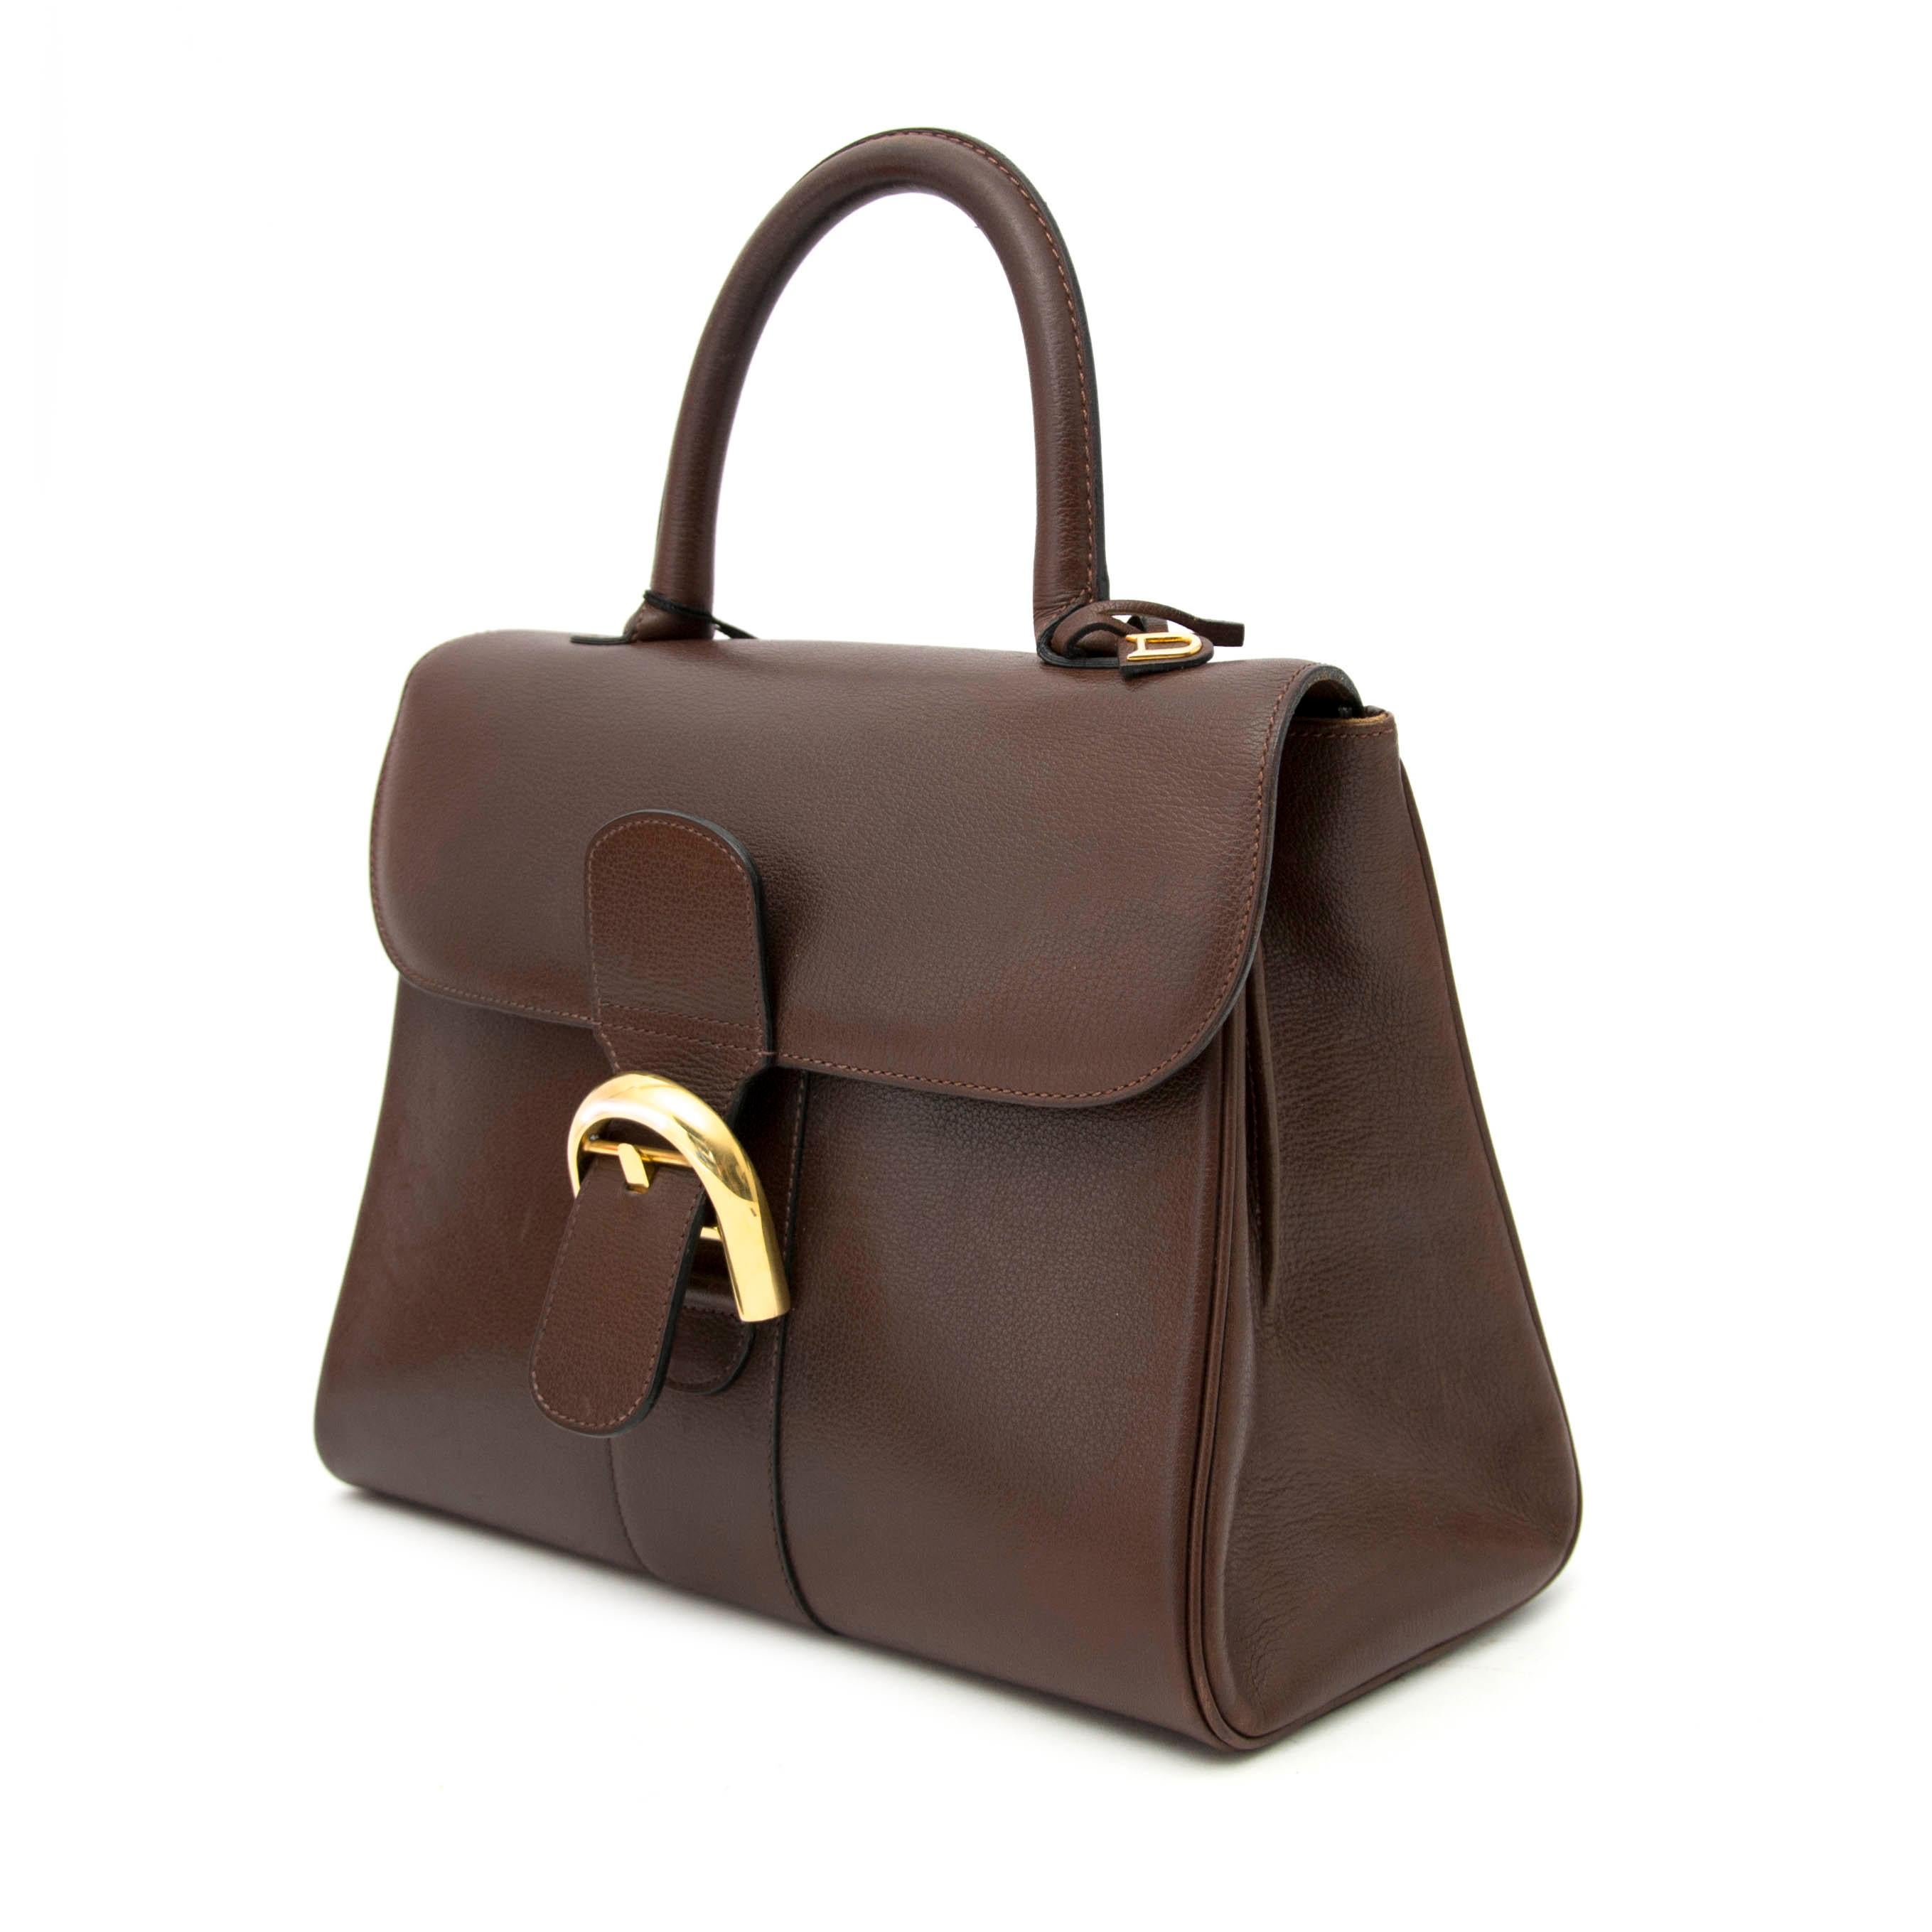 Good Preloved condition

Delvaux Brown Brillant MM + Strap

The iconic Delvaux Brillant MM + strap was designed in 1958 and is still very much on trend today.
This Delvaux Brillant comes in a medium size and is crafted out of brown grained